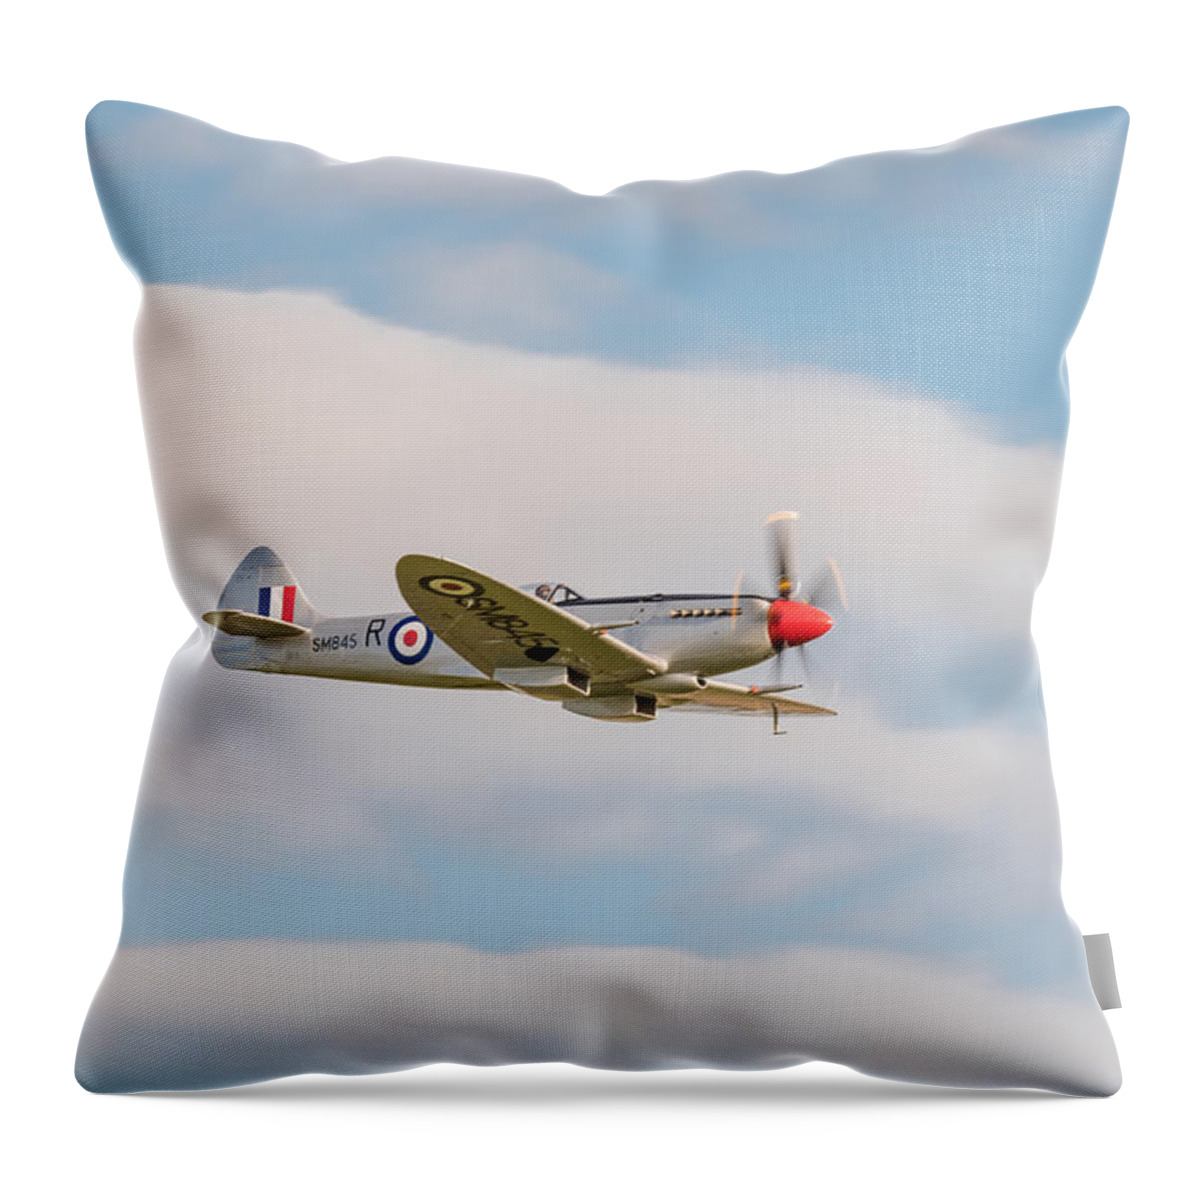 Duxford Battle Of Britain Airshow 2015 Throw Pillow featuring the photograph Silver Spitfire by Gary Eason